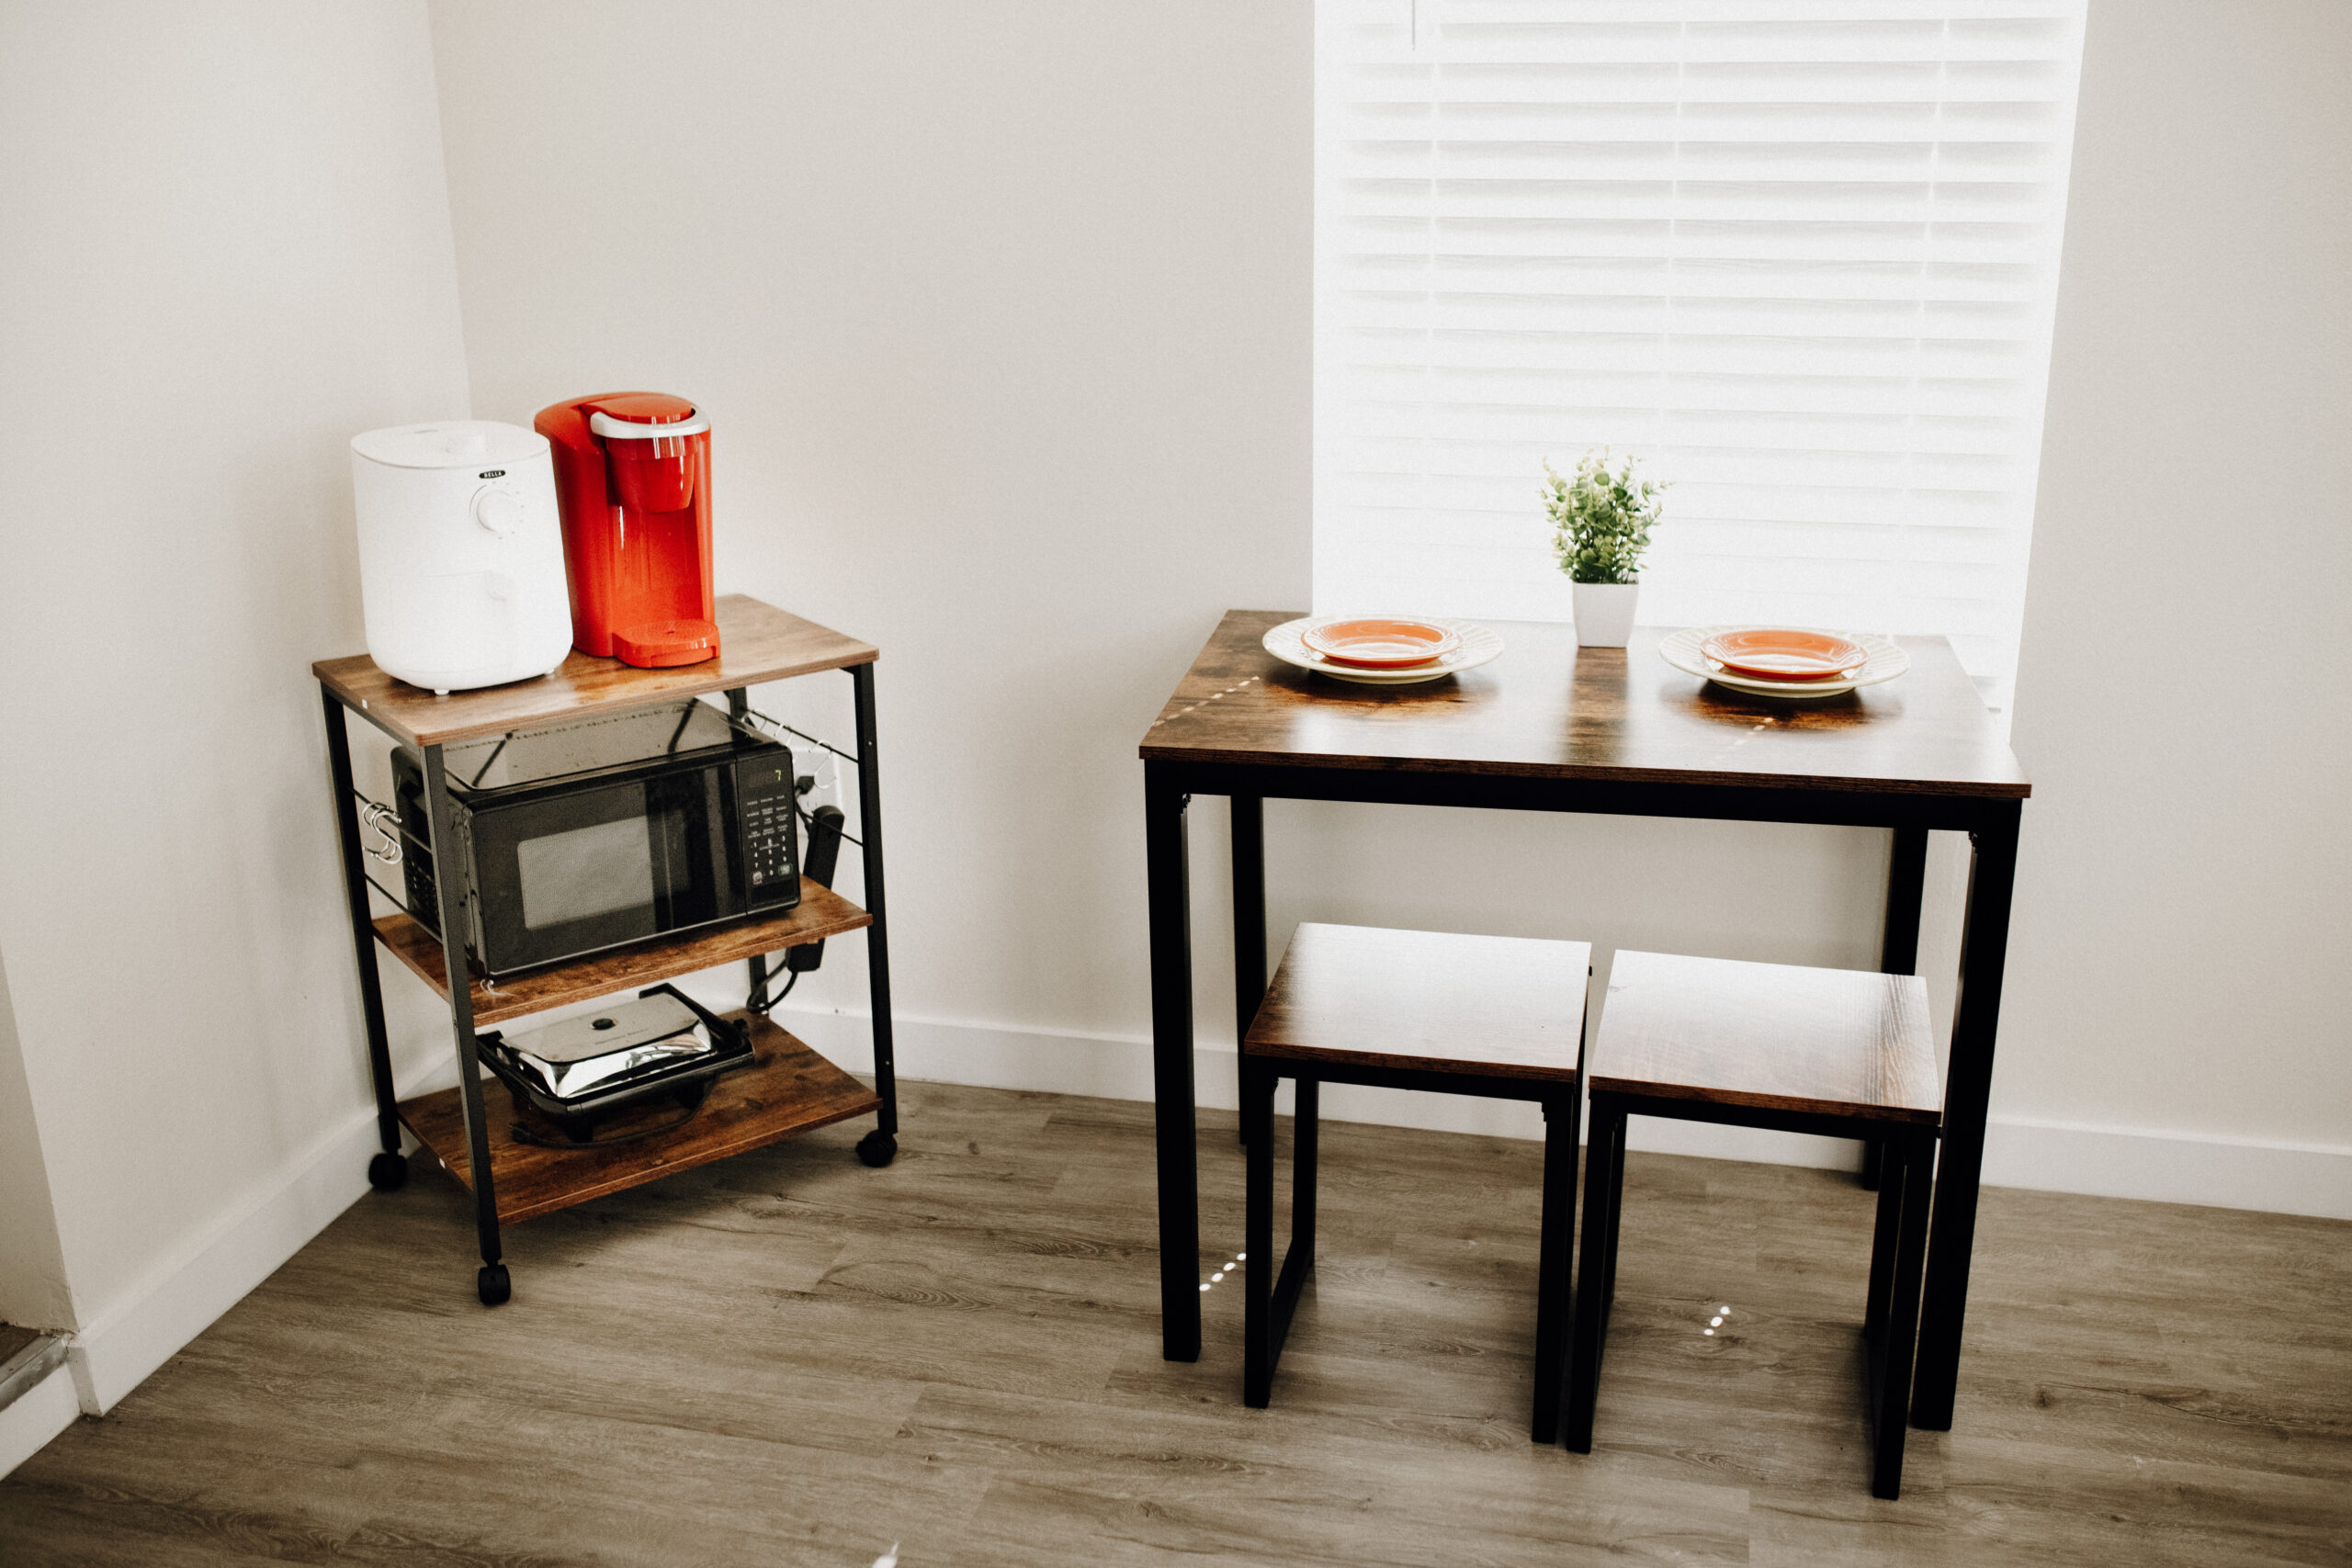 Breakfast nook with coffee maker and kettle and microwave is a lovely place to have a meal with the women of FRESH LIFE RECOVERY HOMES